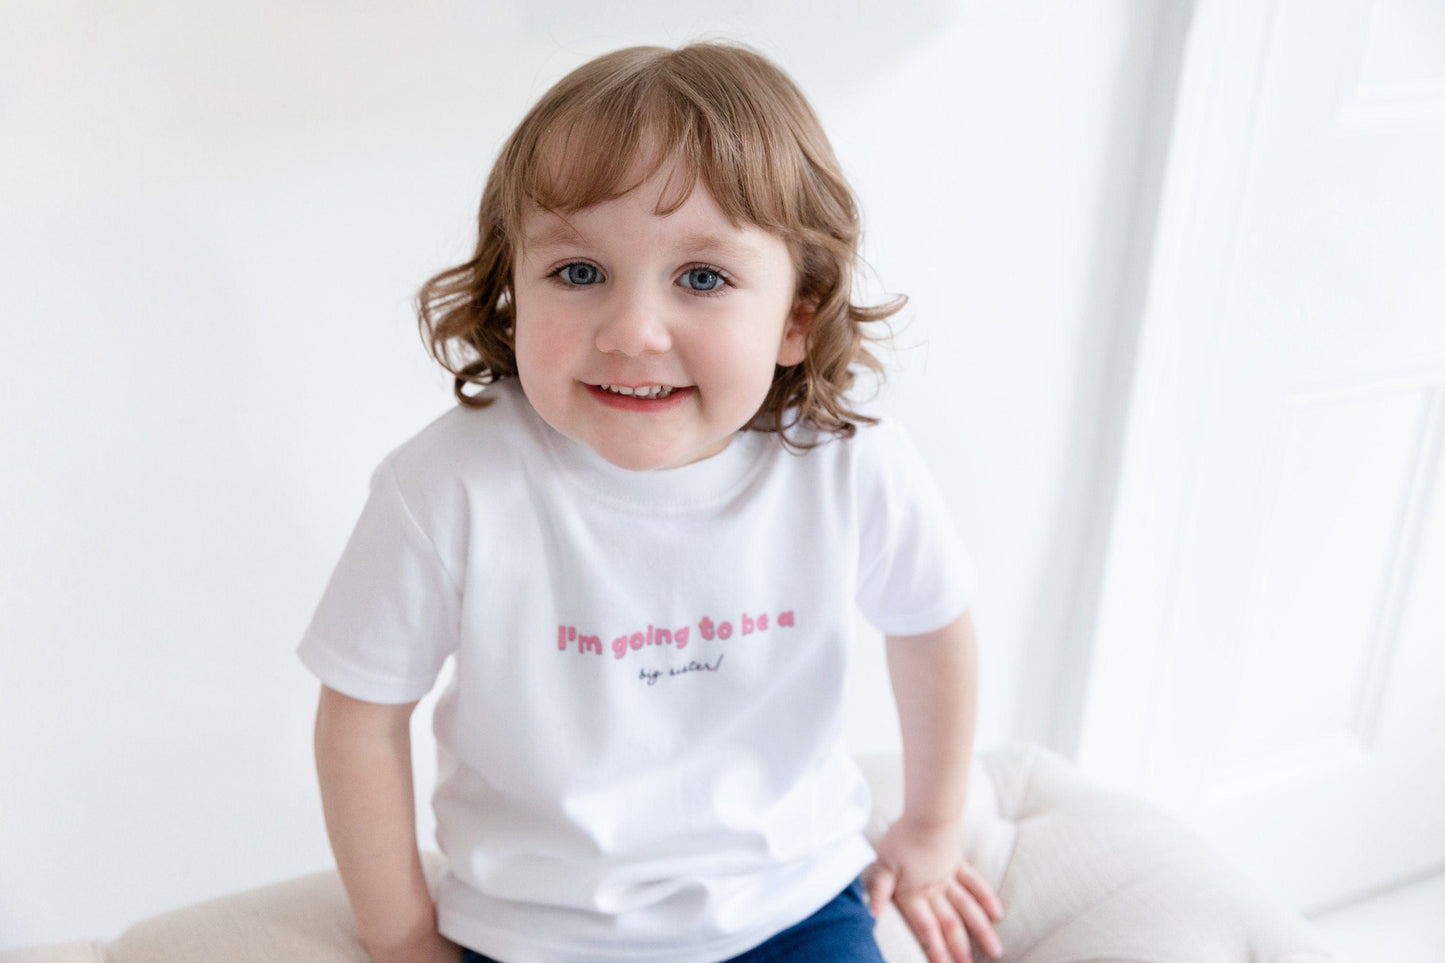 I'm Going To Be a Big Sister Shirt, Big Sister Announcement, Promoted to big sister, baby announcement Sibling t-shirt, pregnancy reveal tee